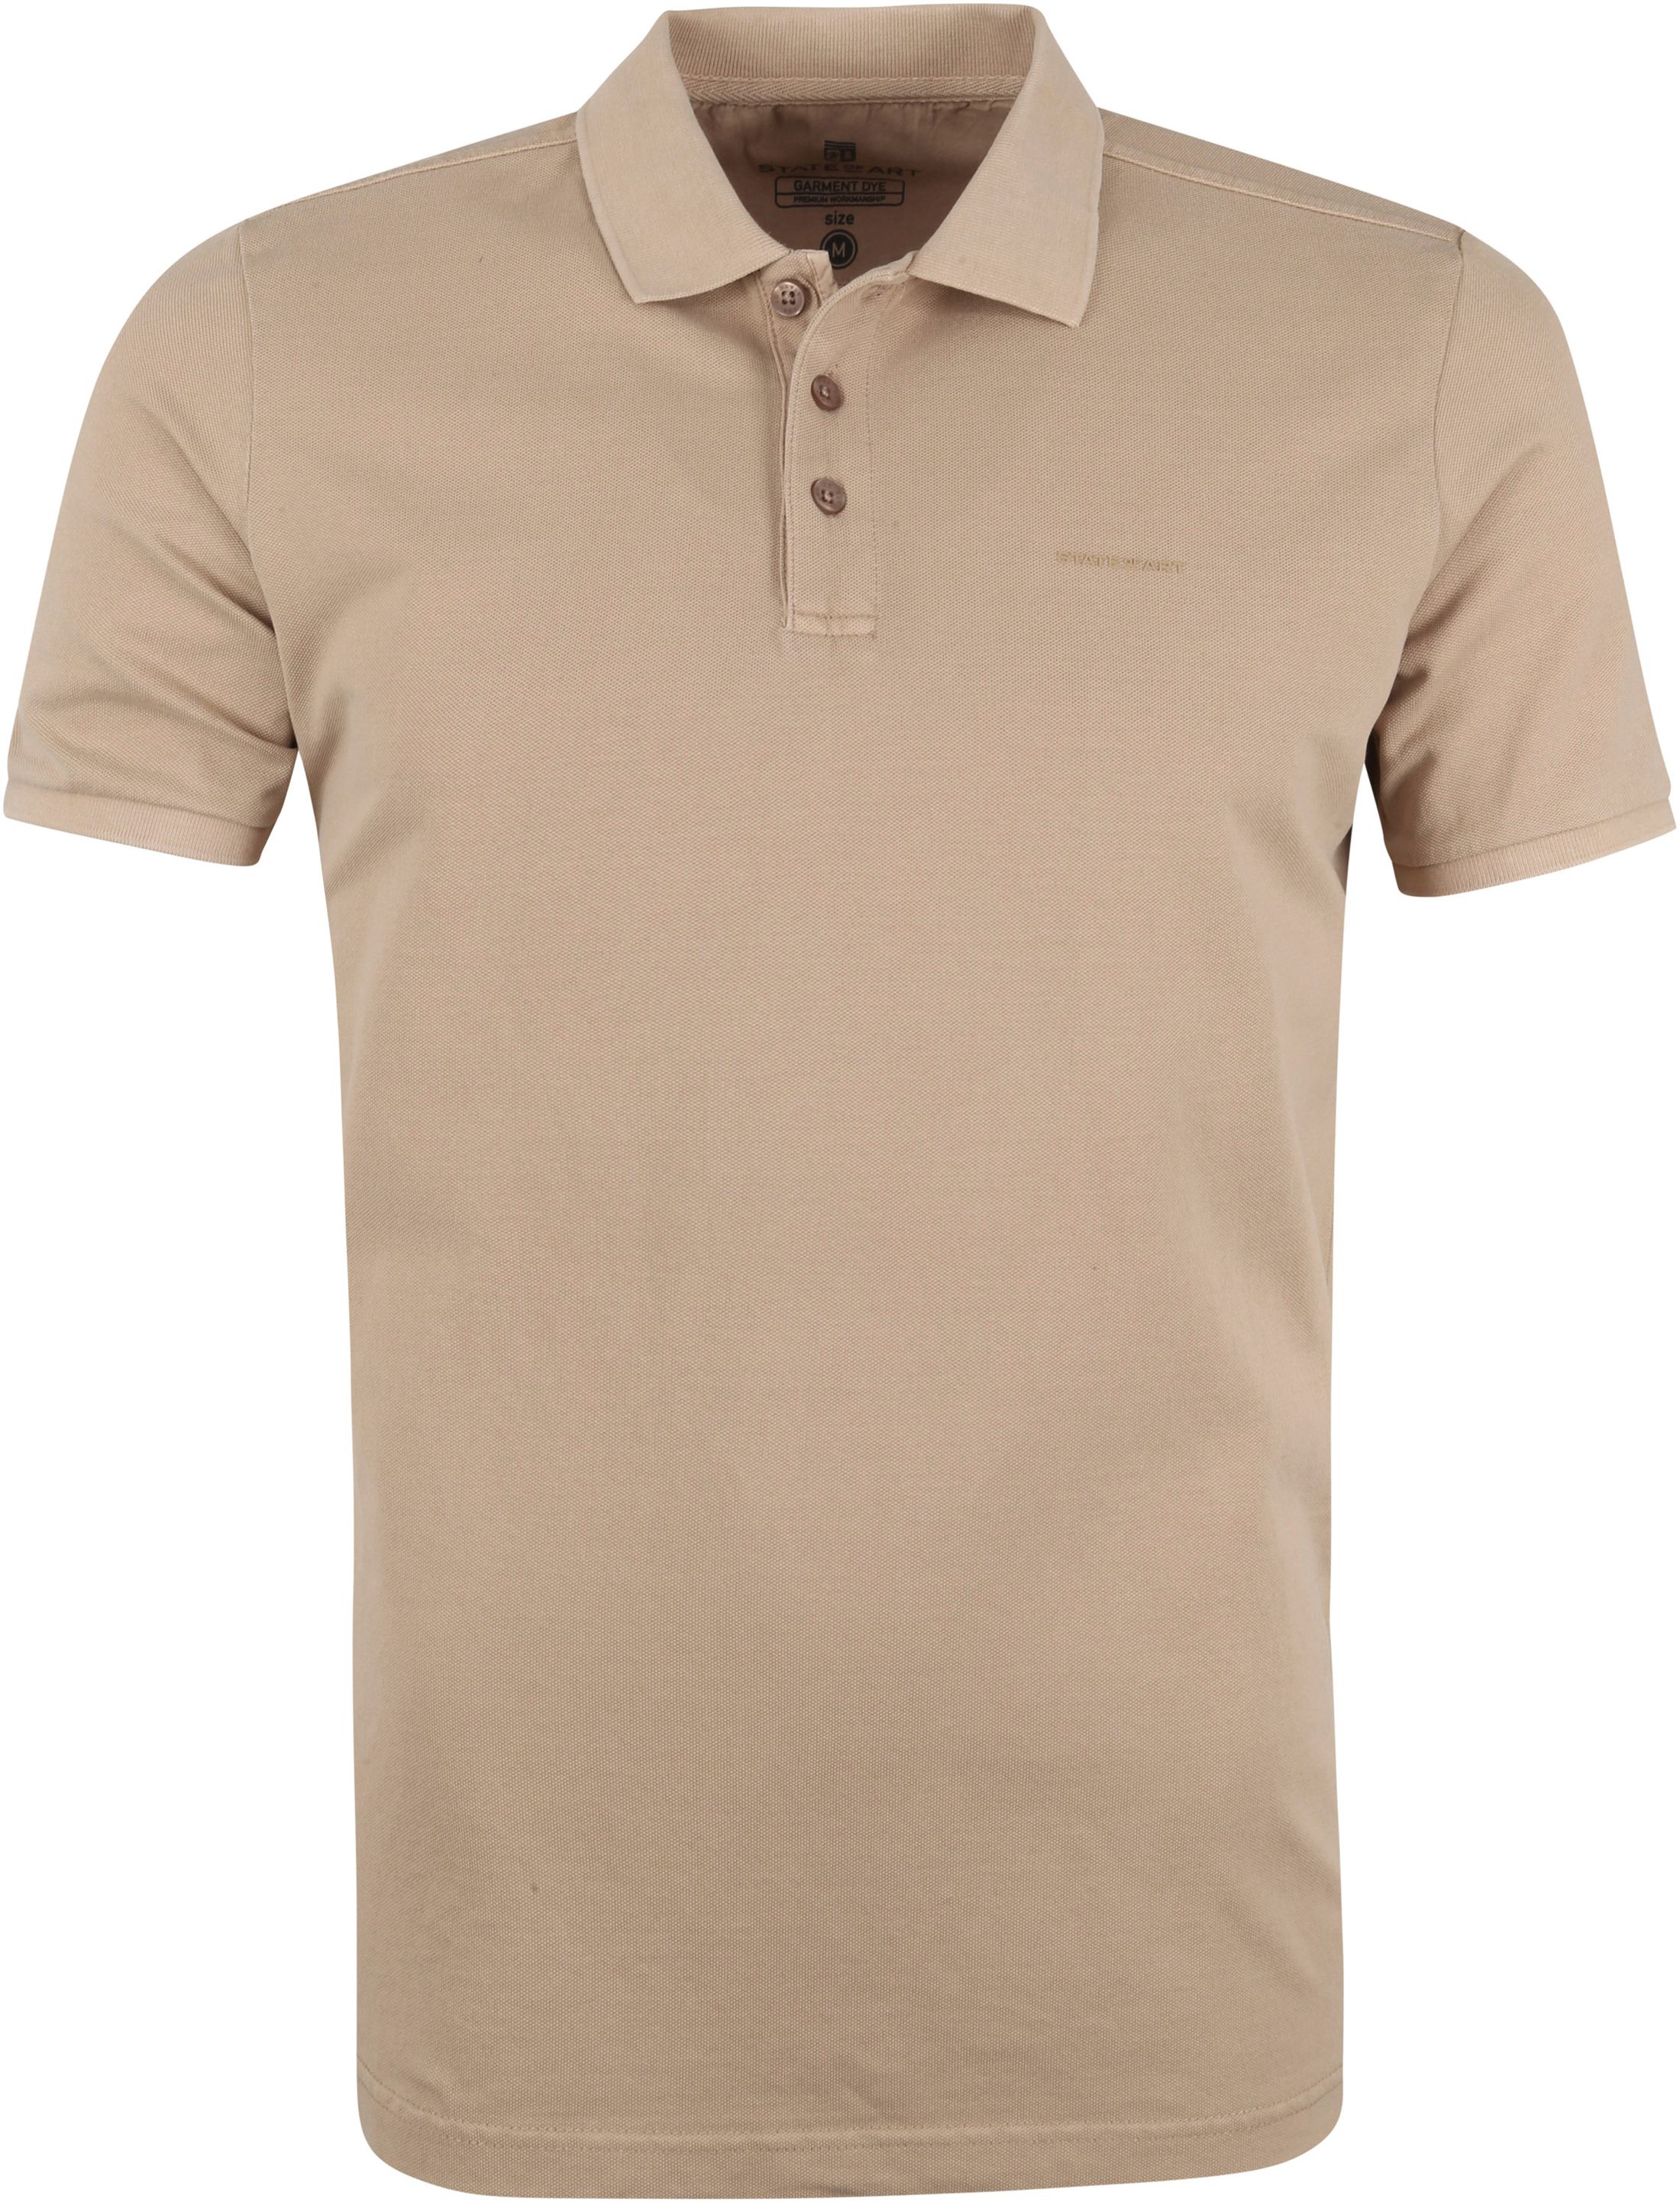 State Of Art Pique Polo Shirt Beige size 3XL